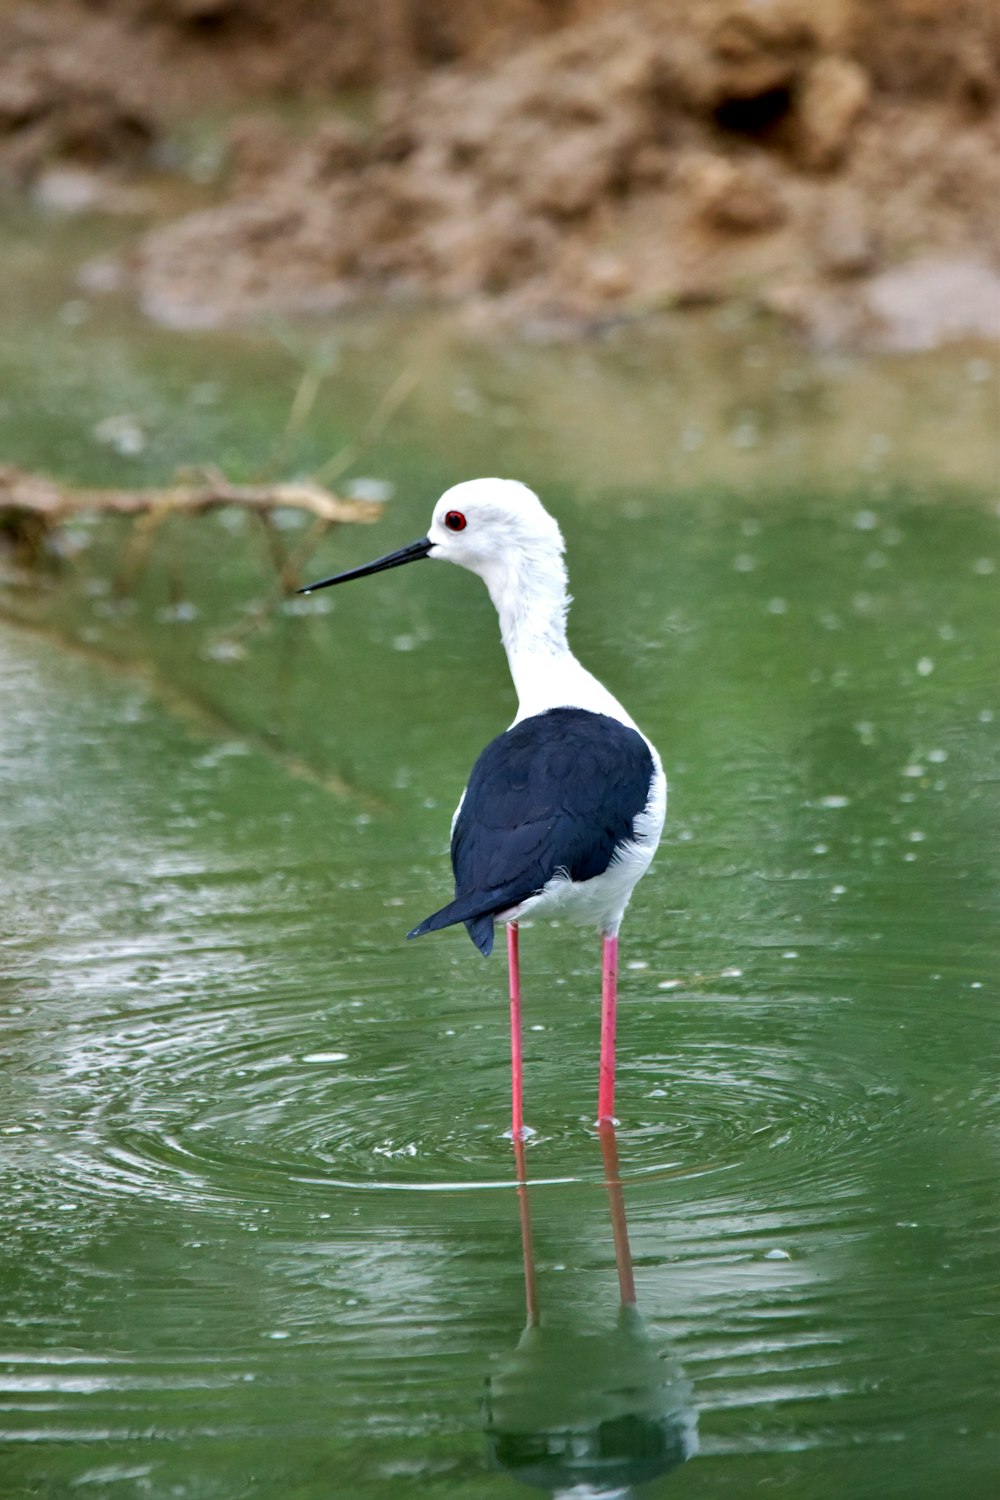 a black and white bird standing in a body of water